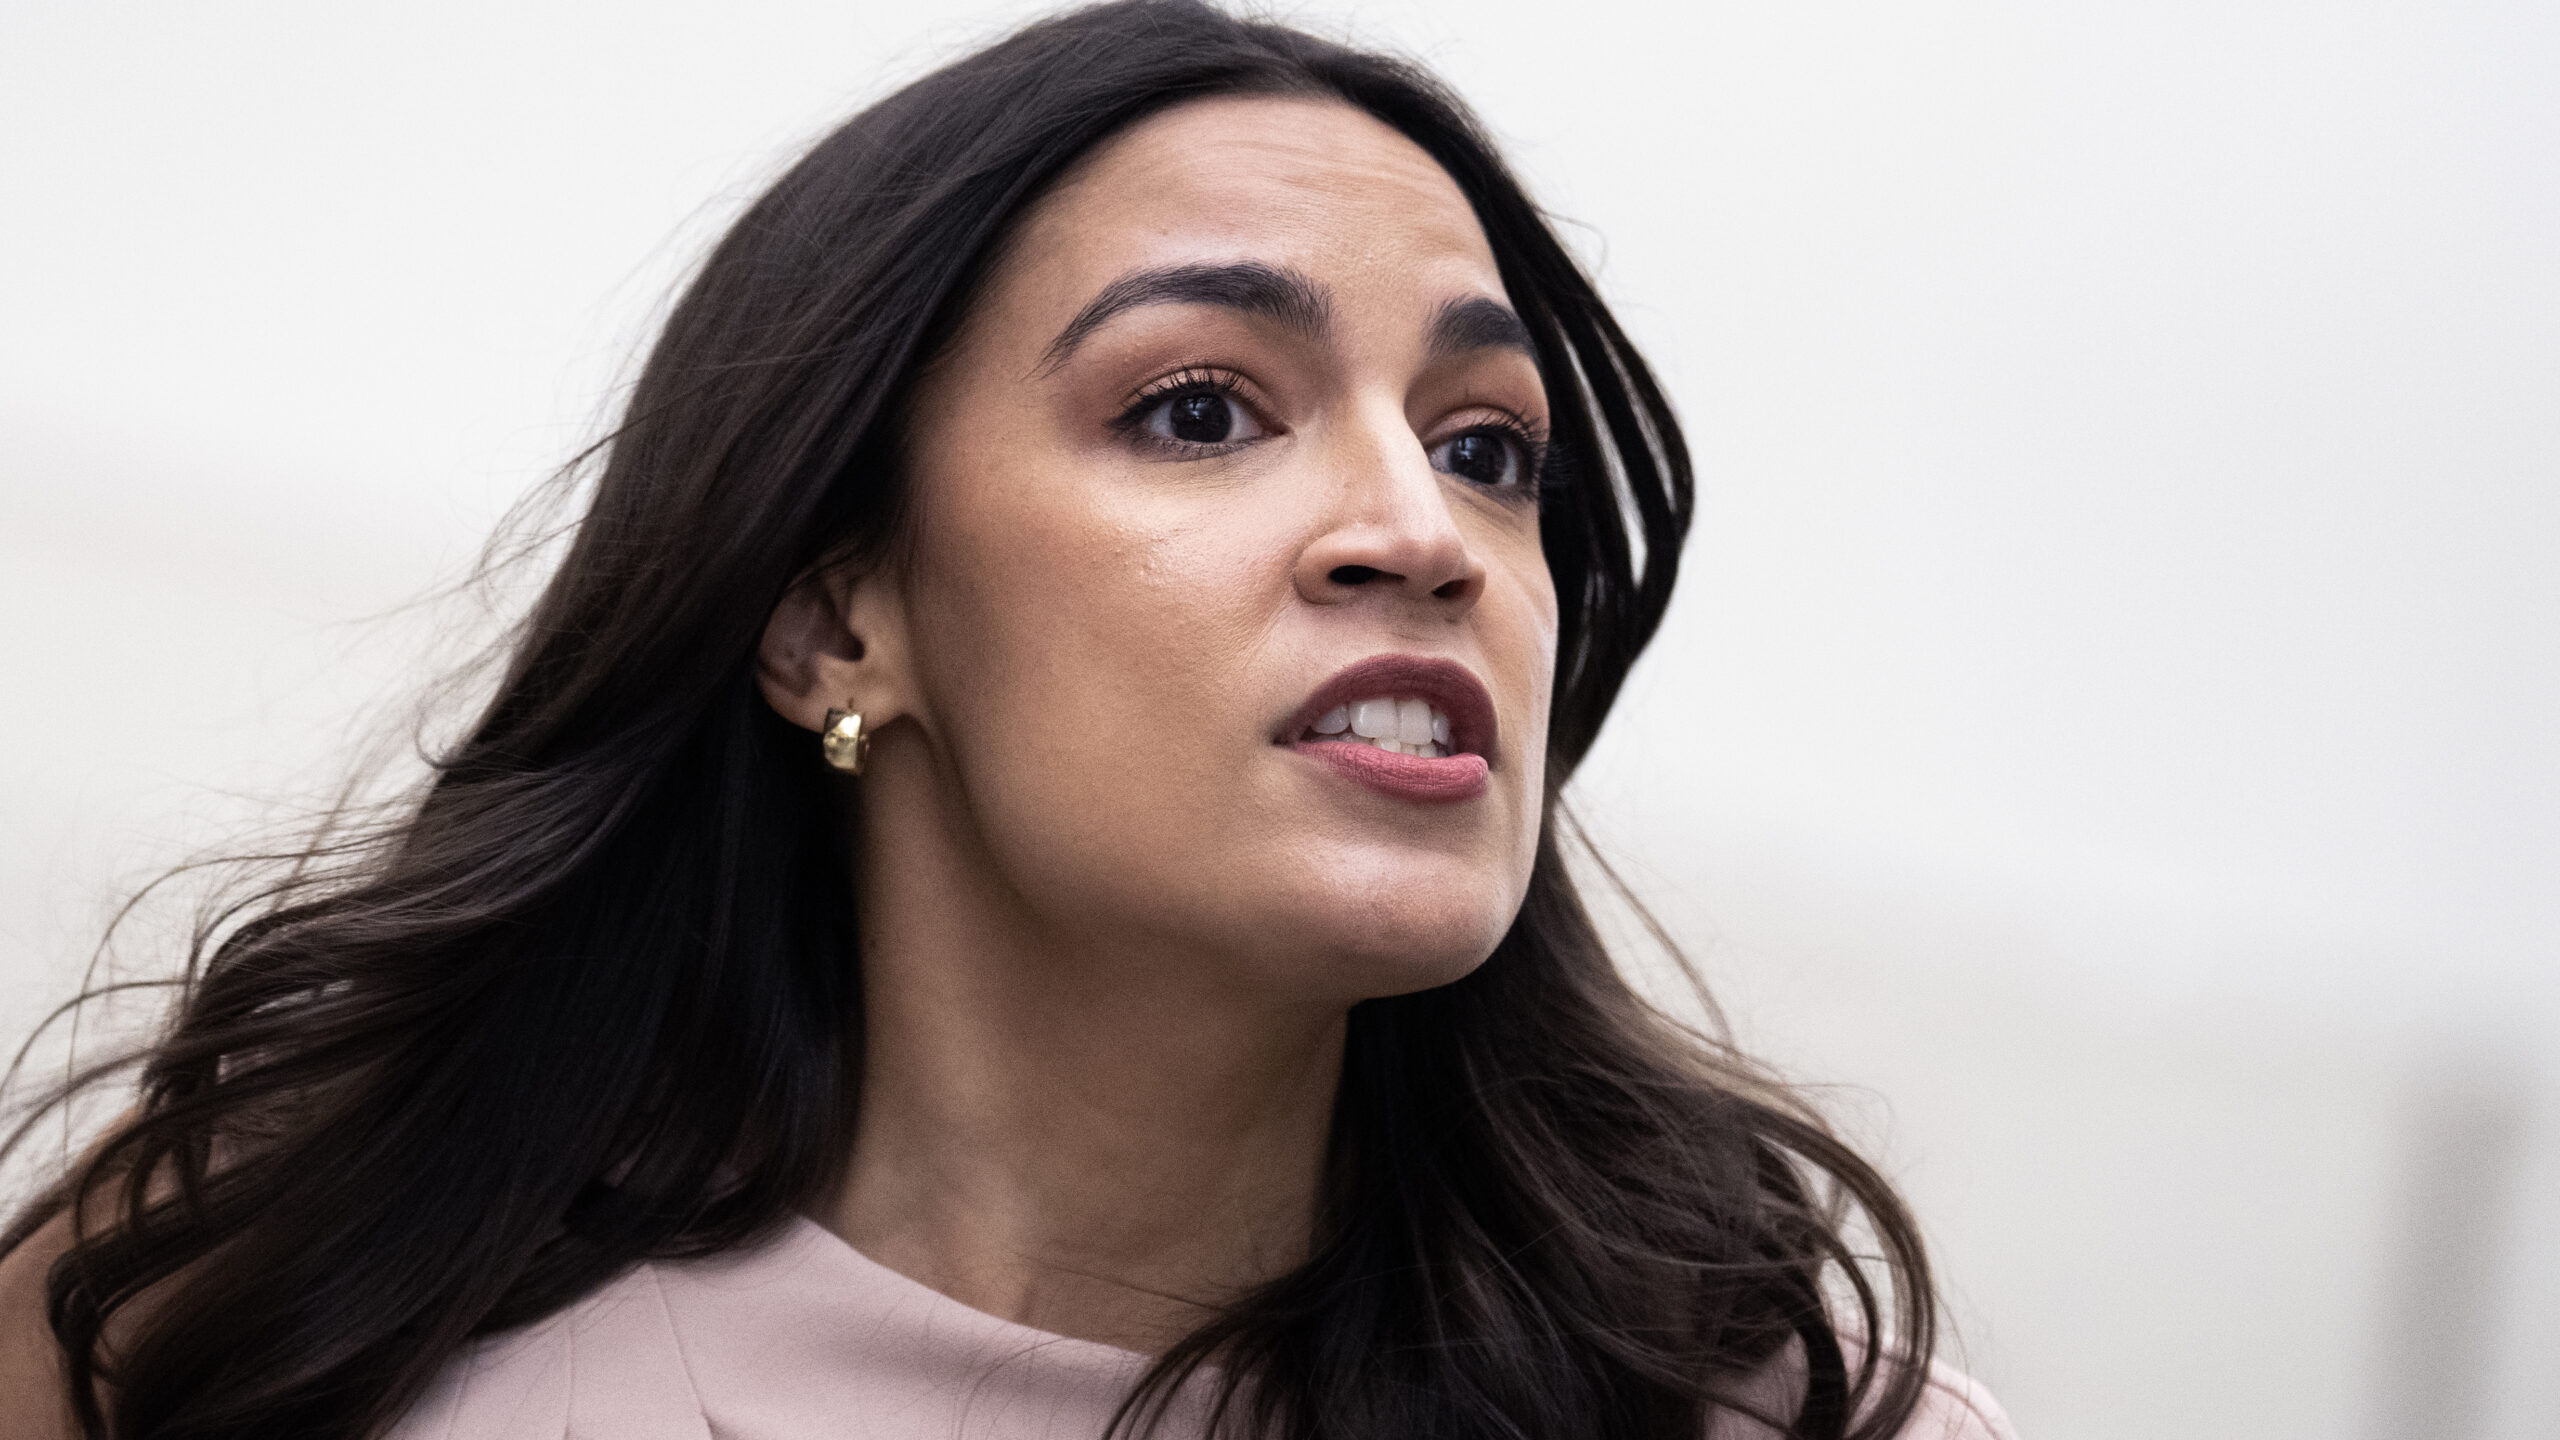 Fetterman Triggers AOC With Criticism Over ‘Jerry Springer’-Esque Congressional Hearing